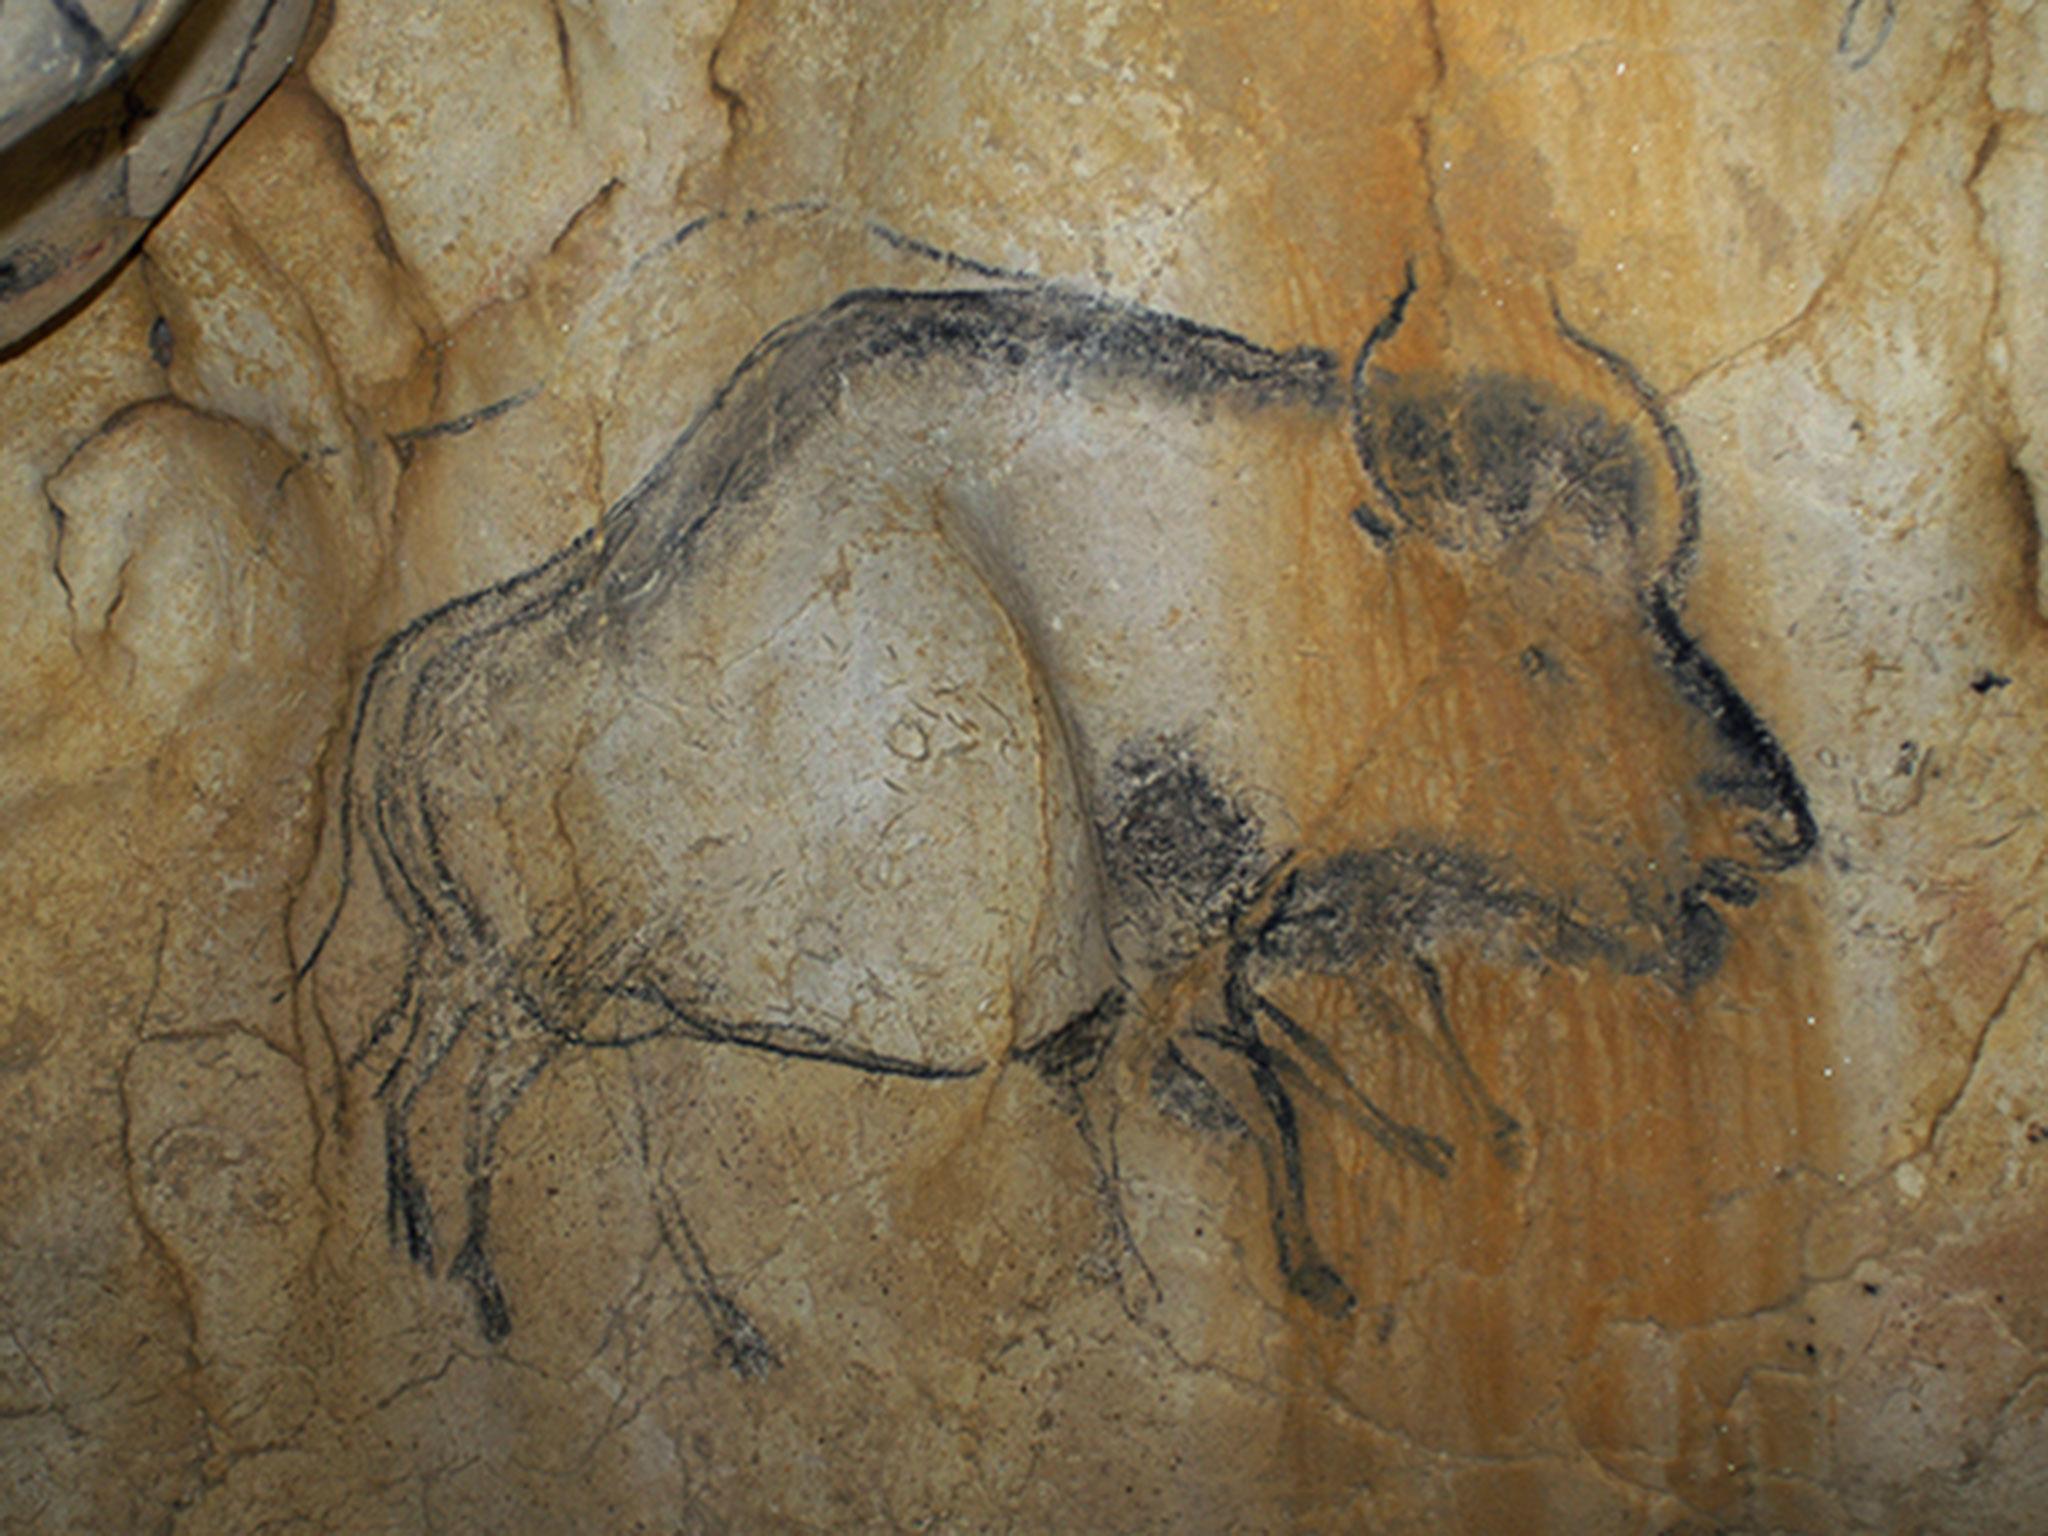 A black charcoal drawing of steppe bison in the Chauvet-Pont d'Arc cave in France